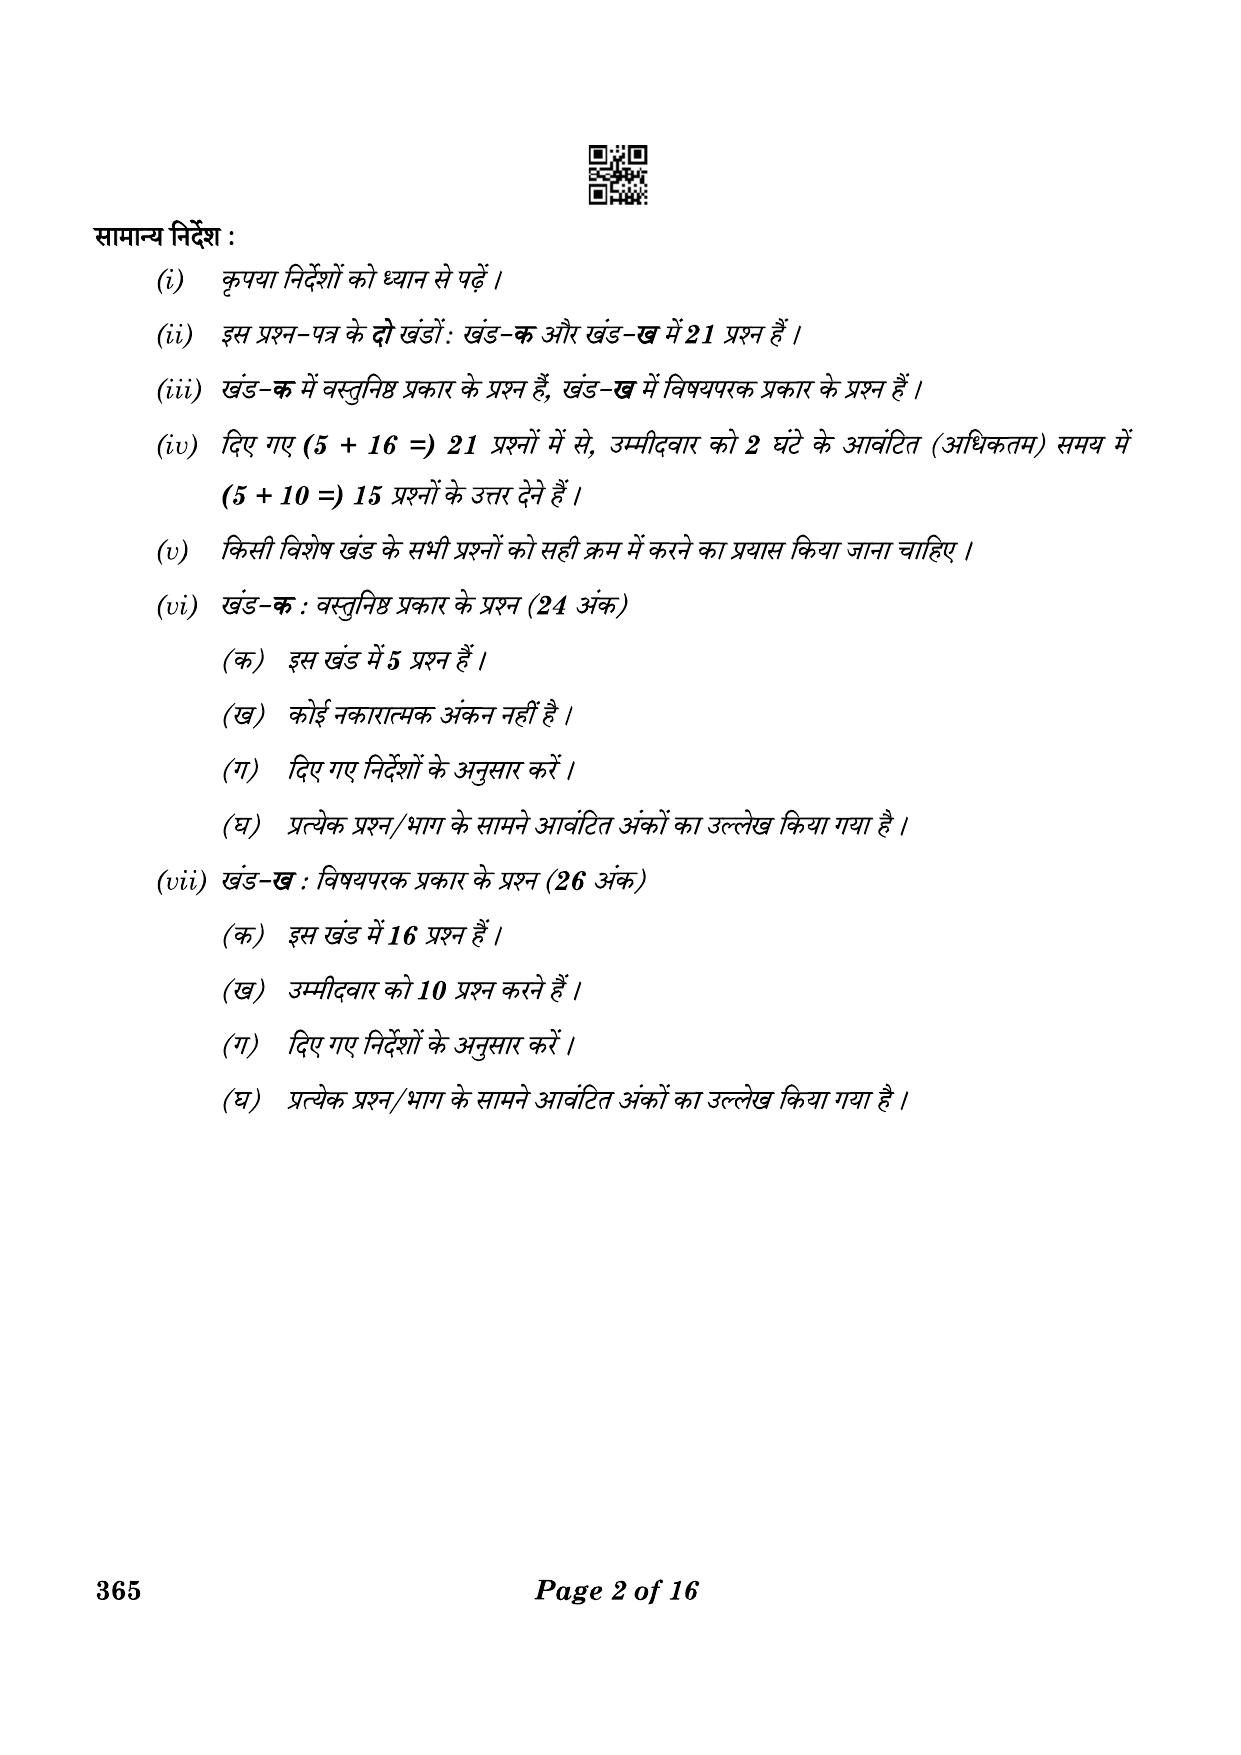 CBSE Class 12 365_Yoga 2023 Question Paper - Page 2